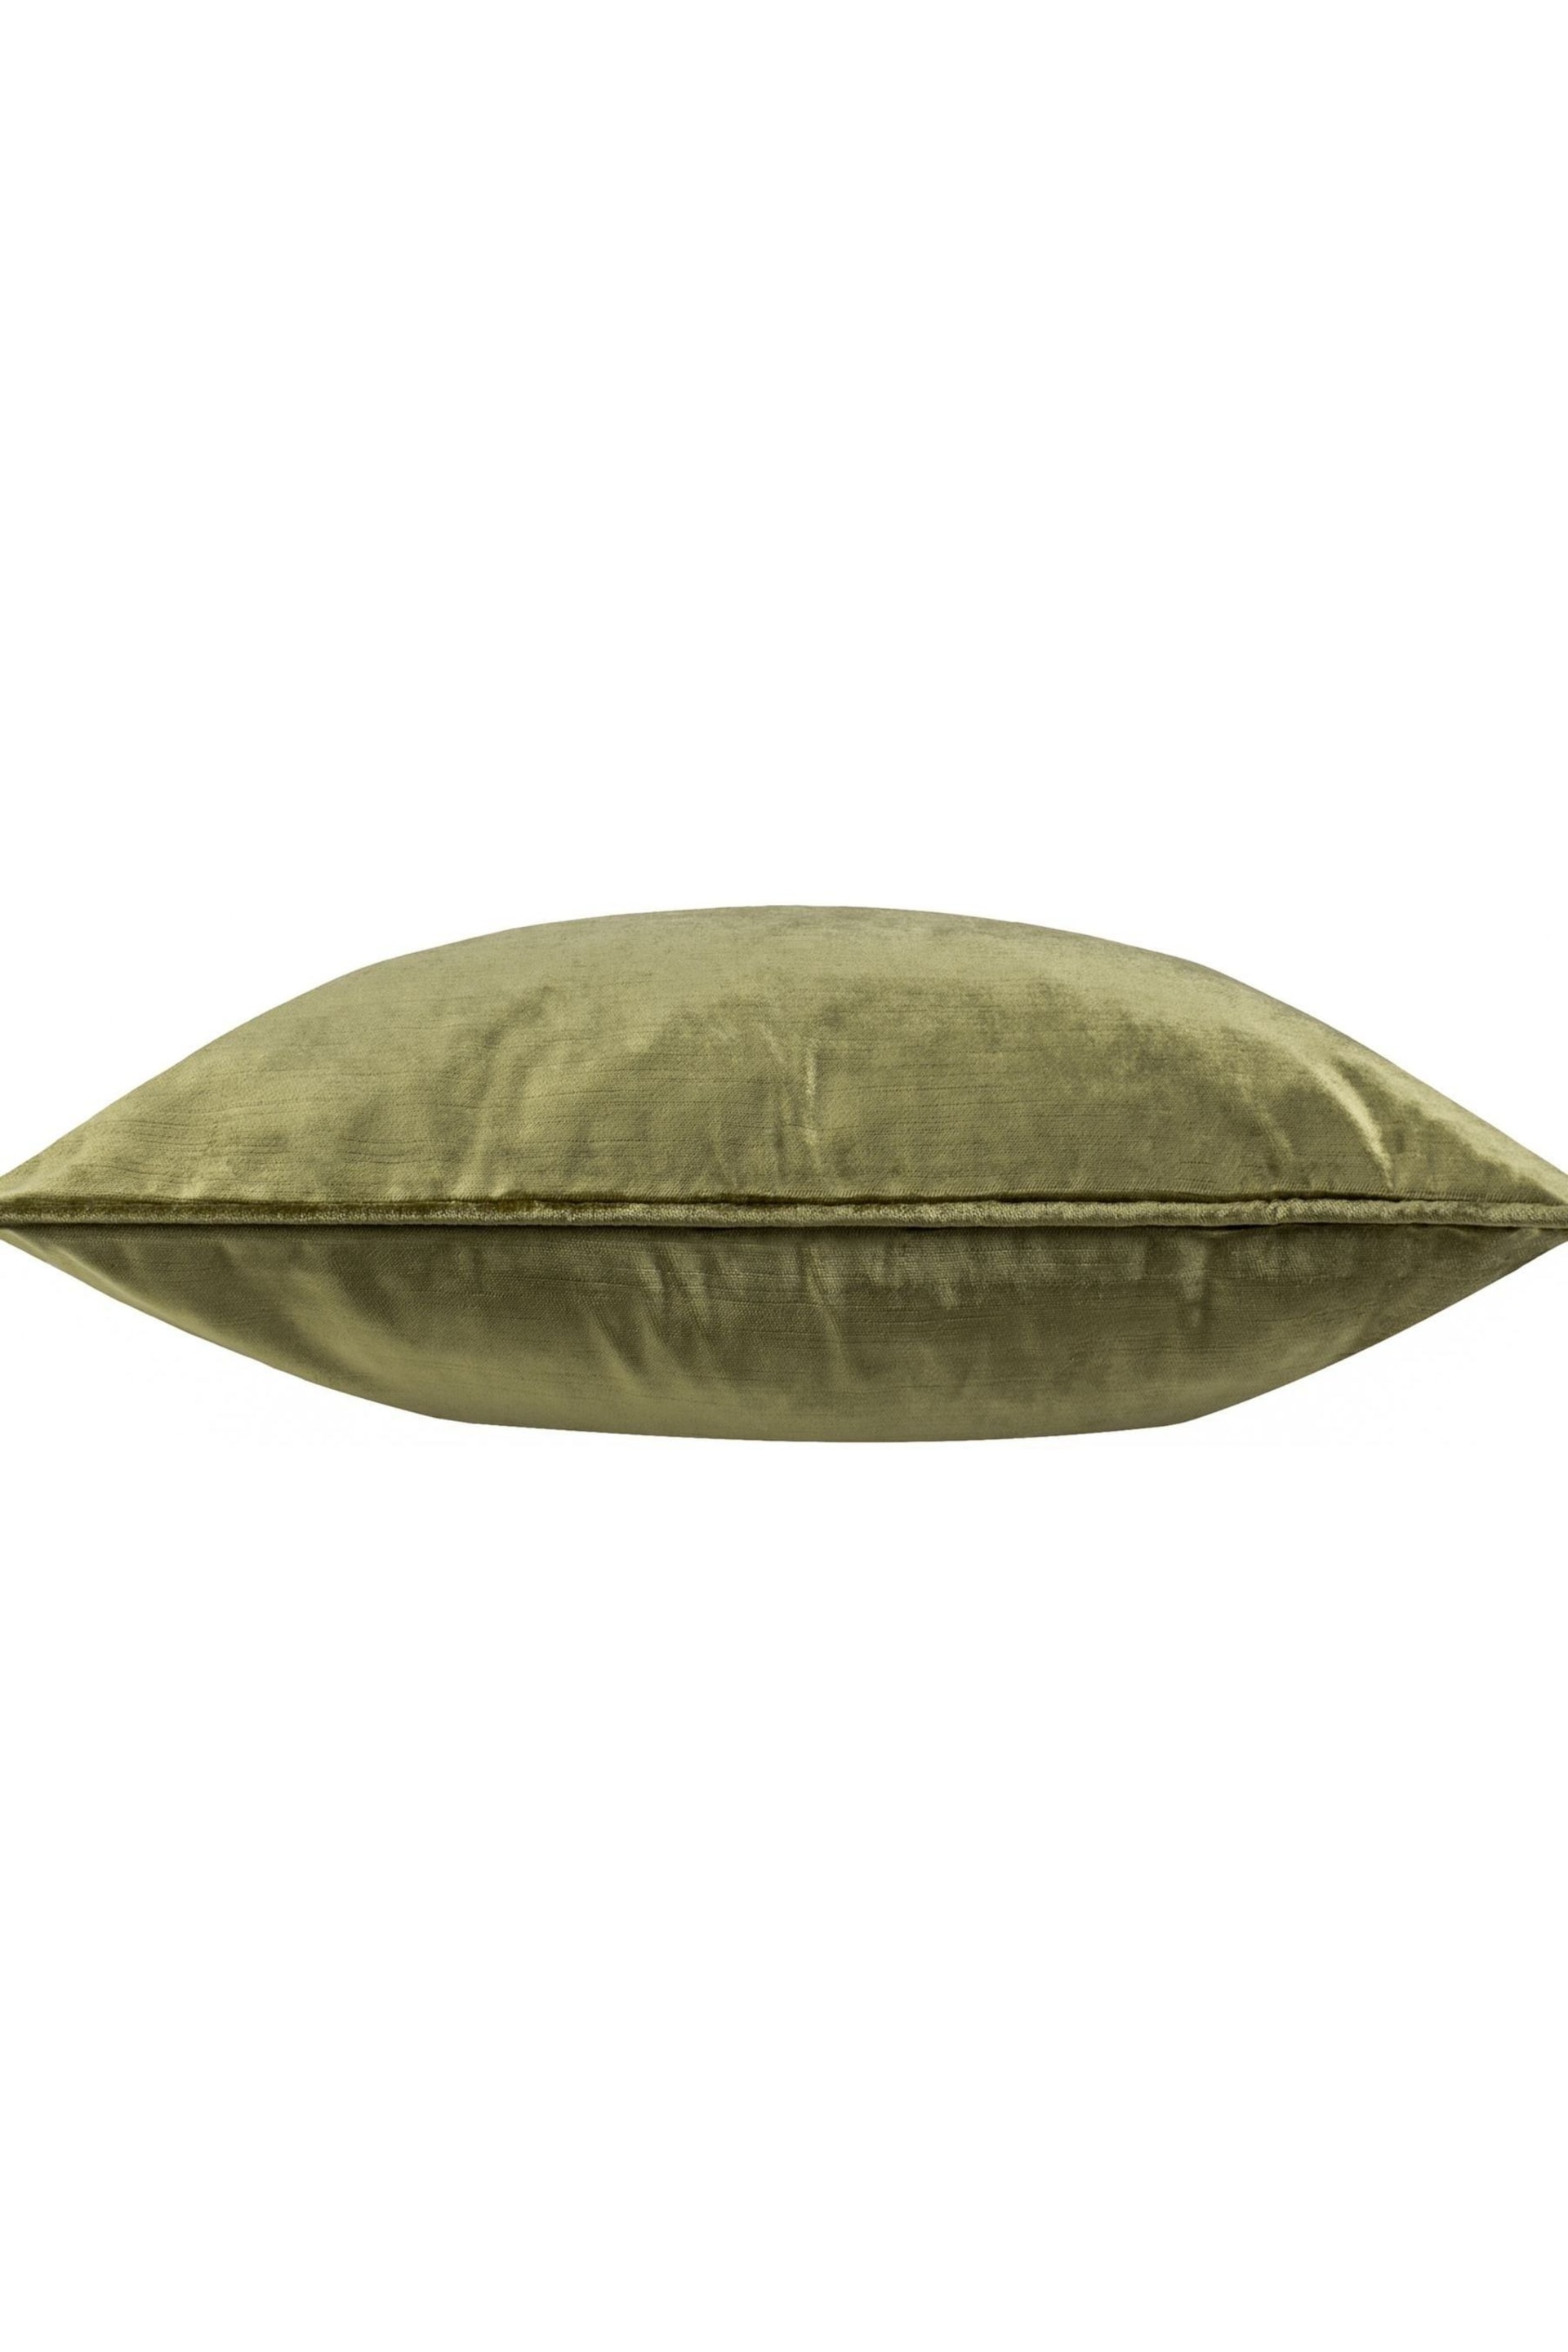 Riva Paoletti Olive Green Luxe Velvet Cushion - Image 2 of 3